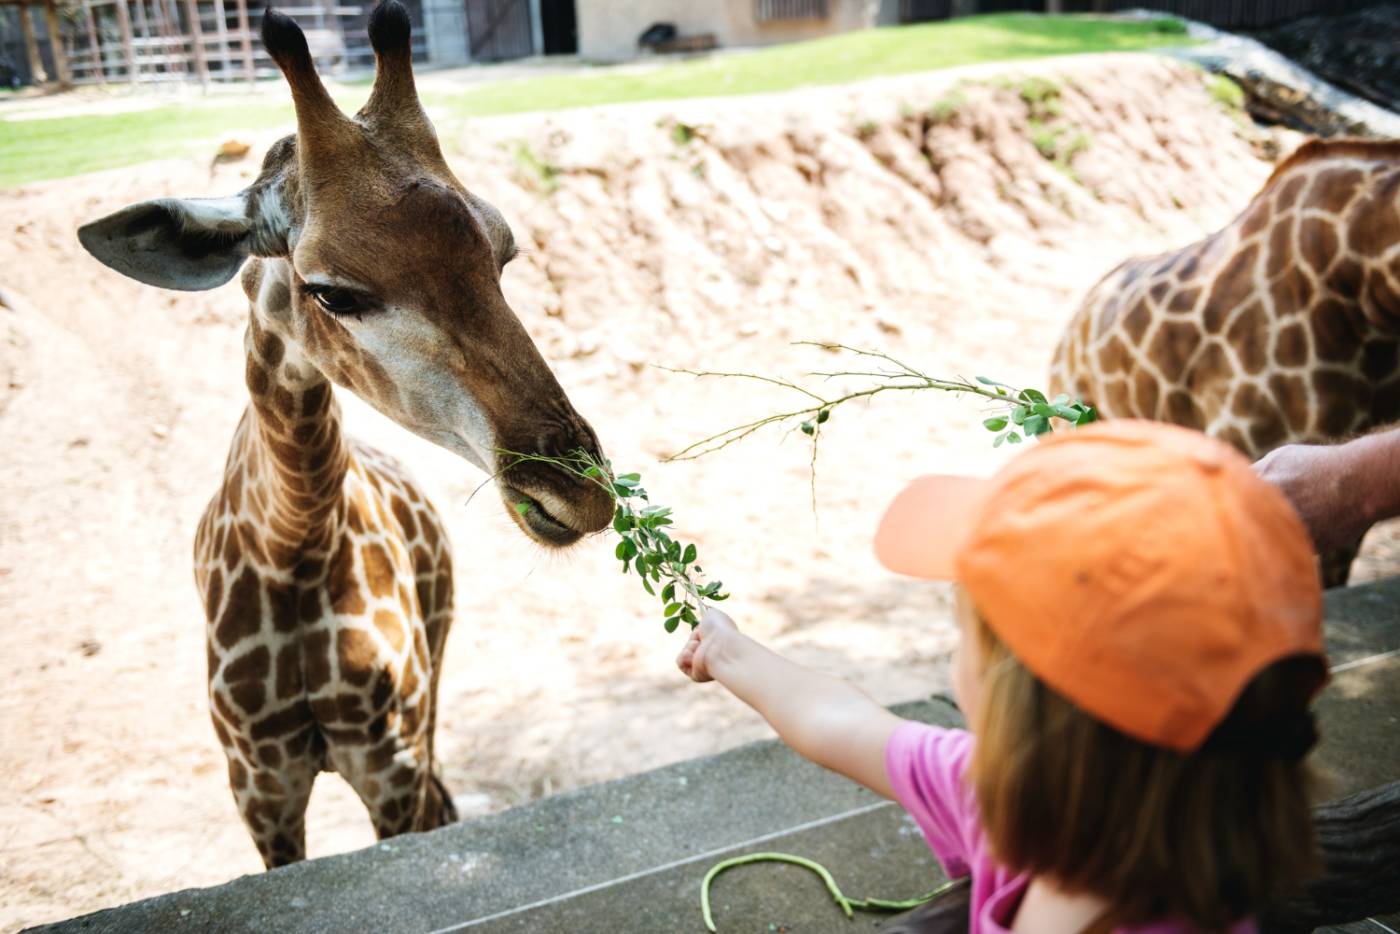 Young Caucasian girl giving food to a giraffe at the zoo